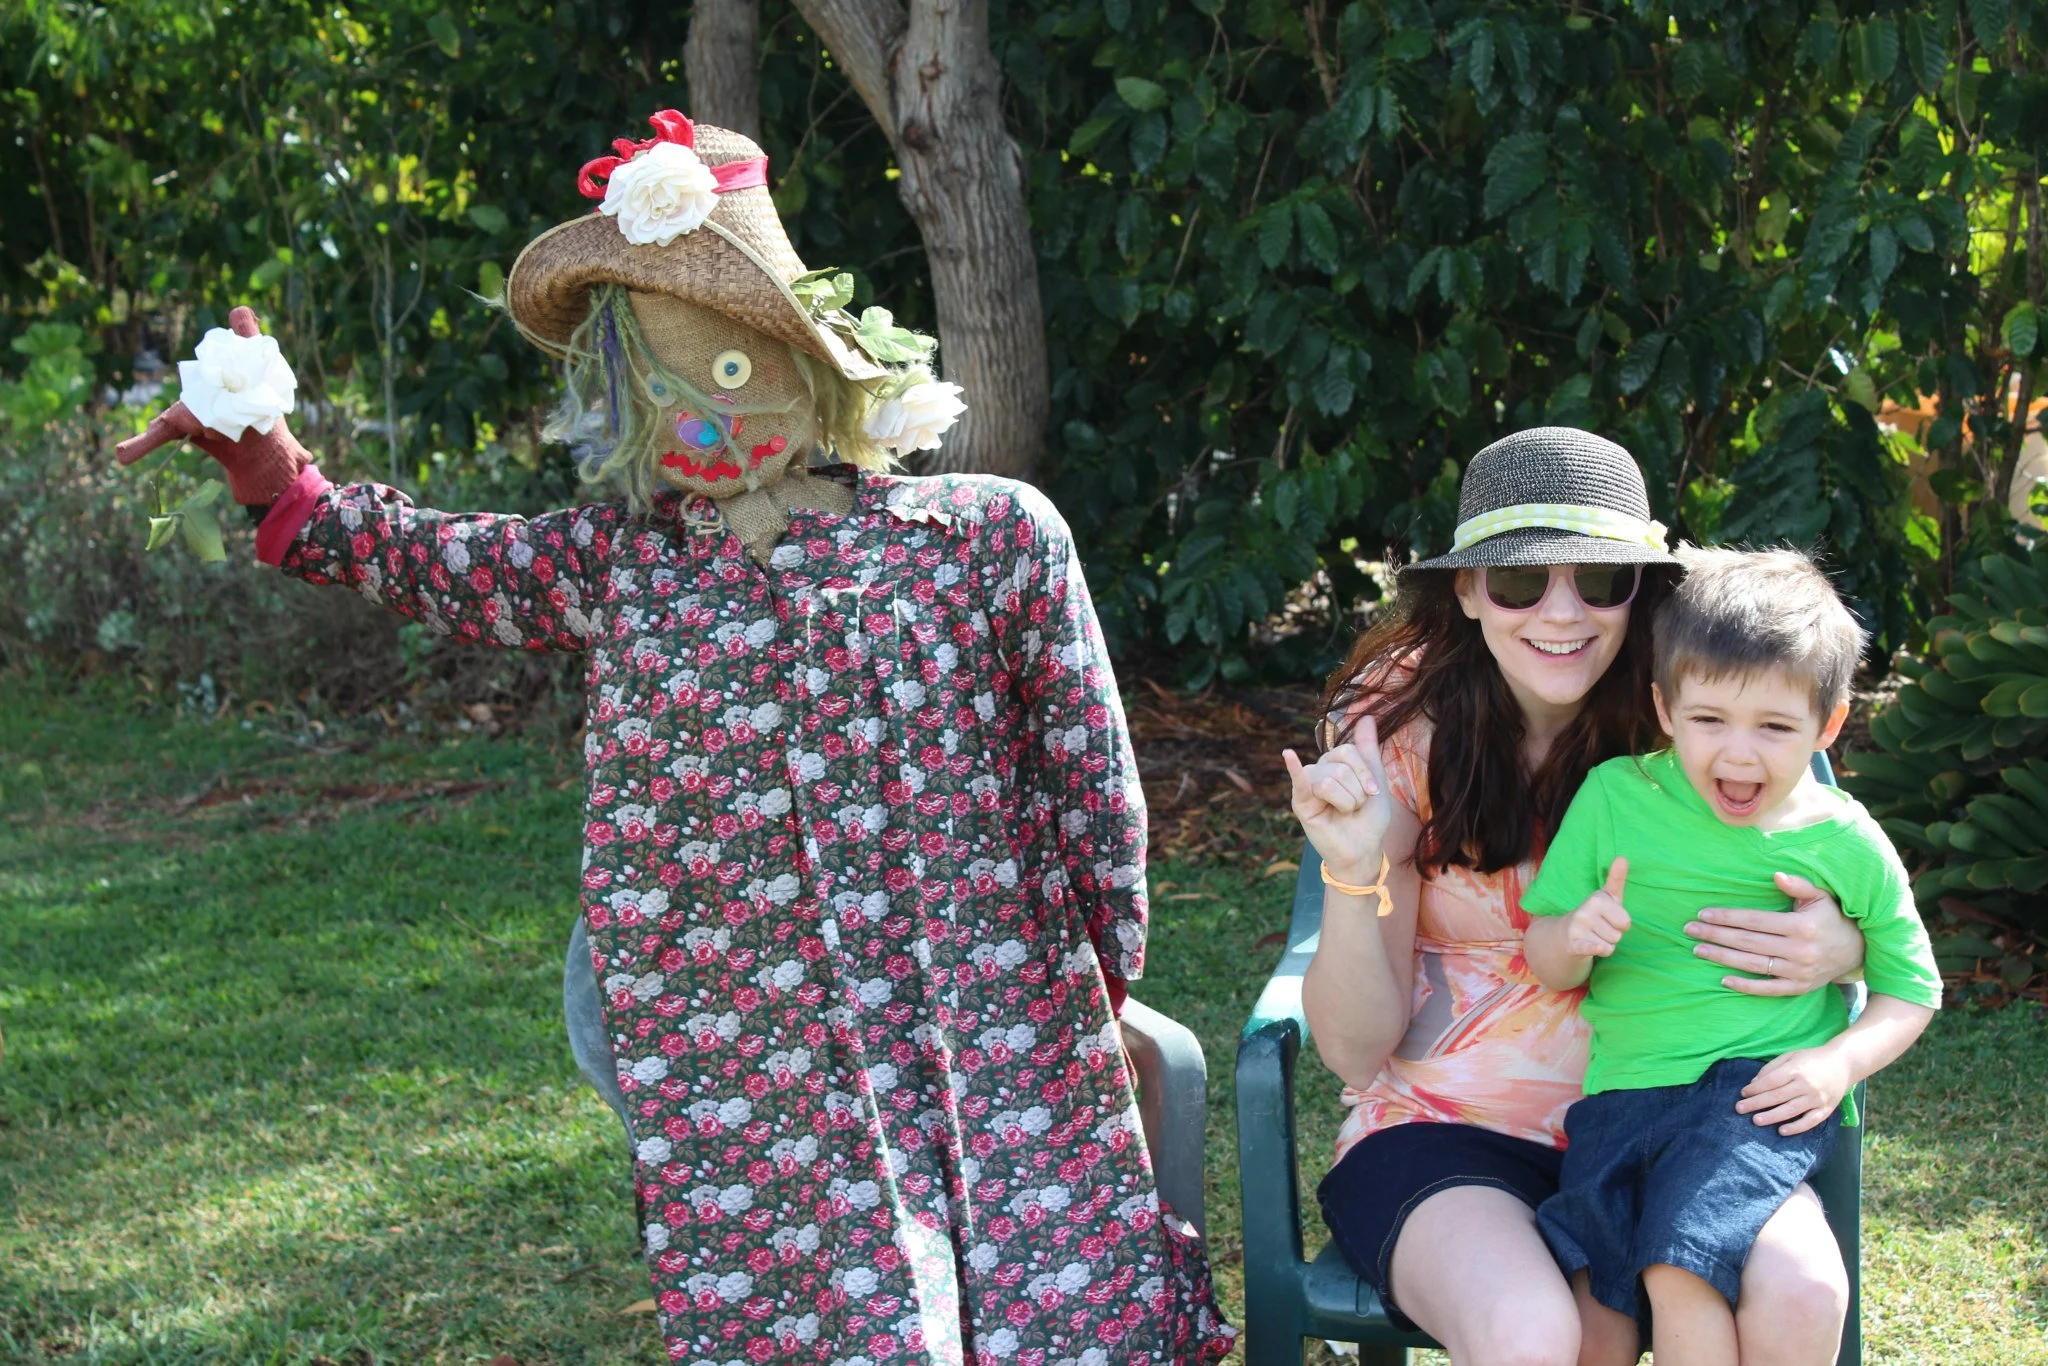 Also, the scarecrows in the fields. 